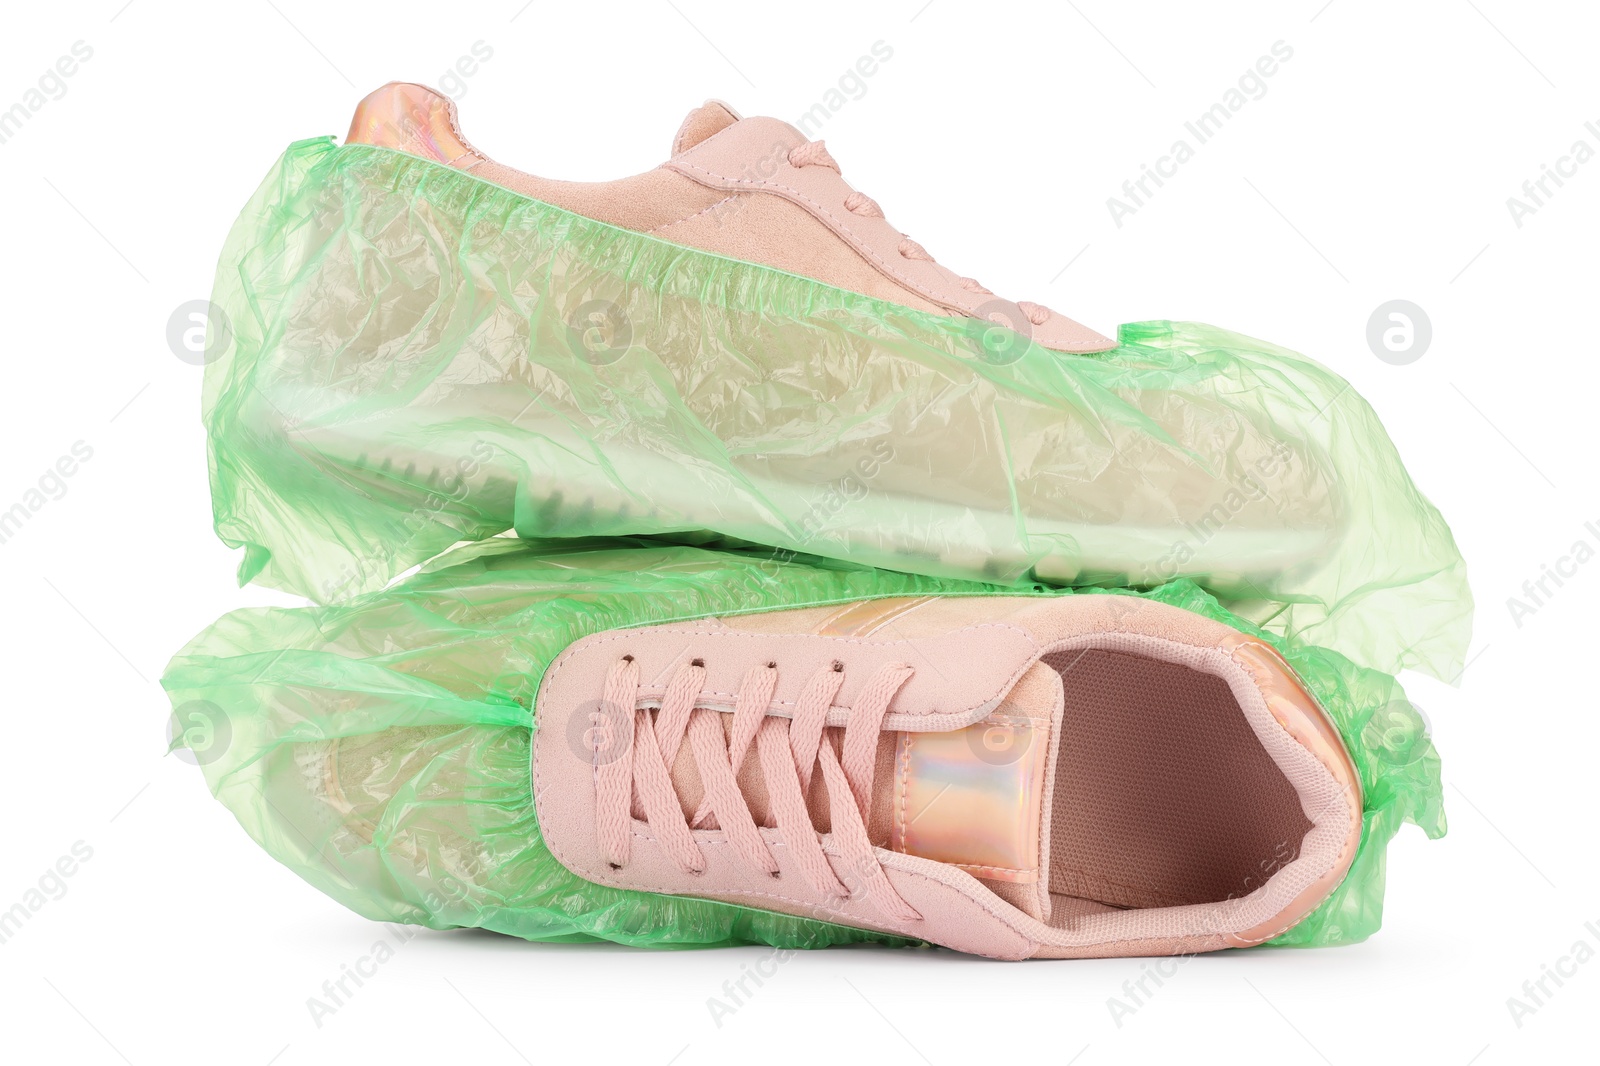 Photo of Sneakers in green shoe covers isolated on white